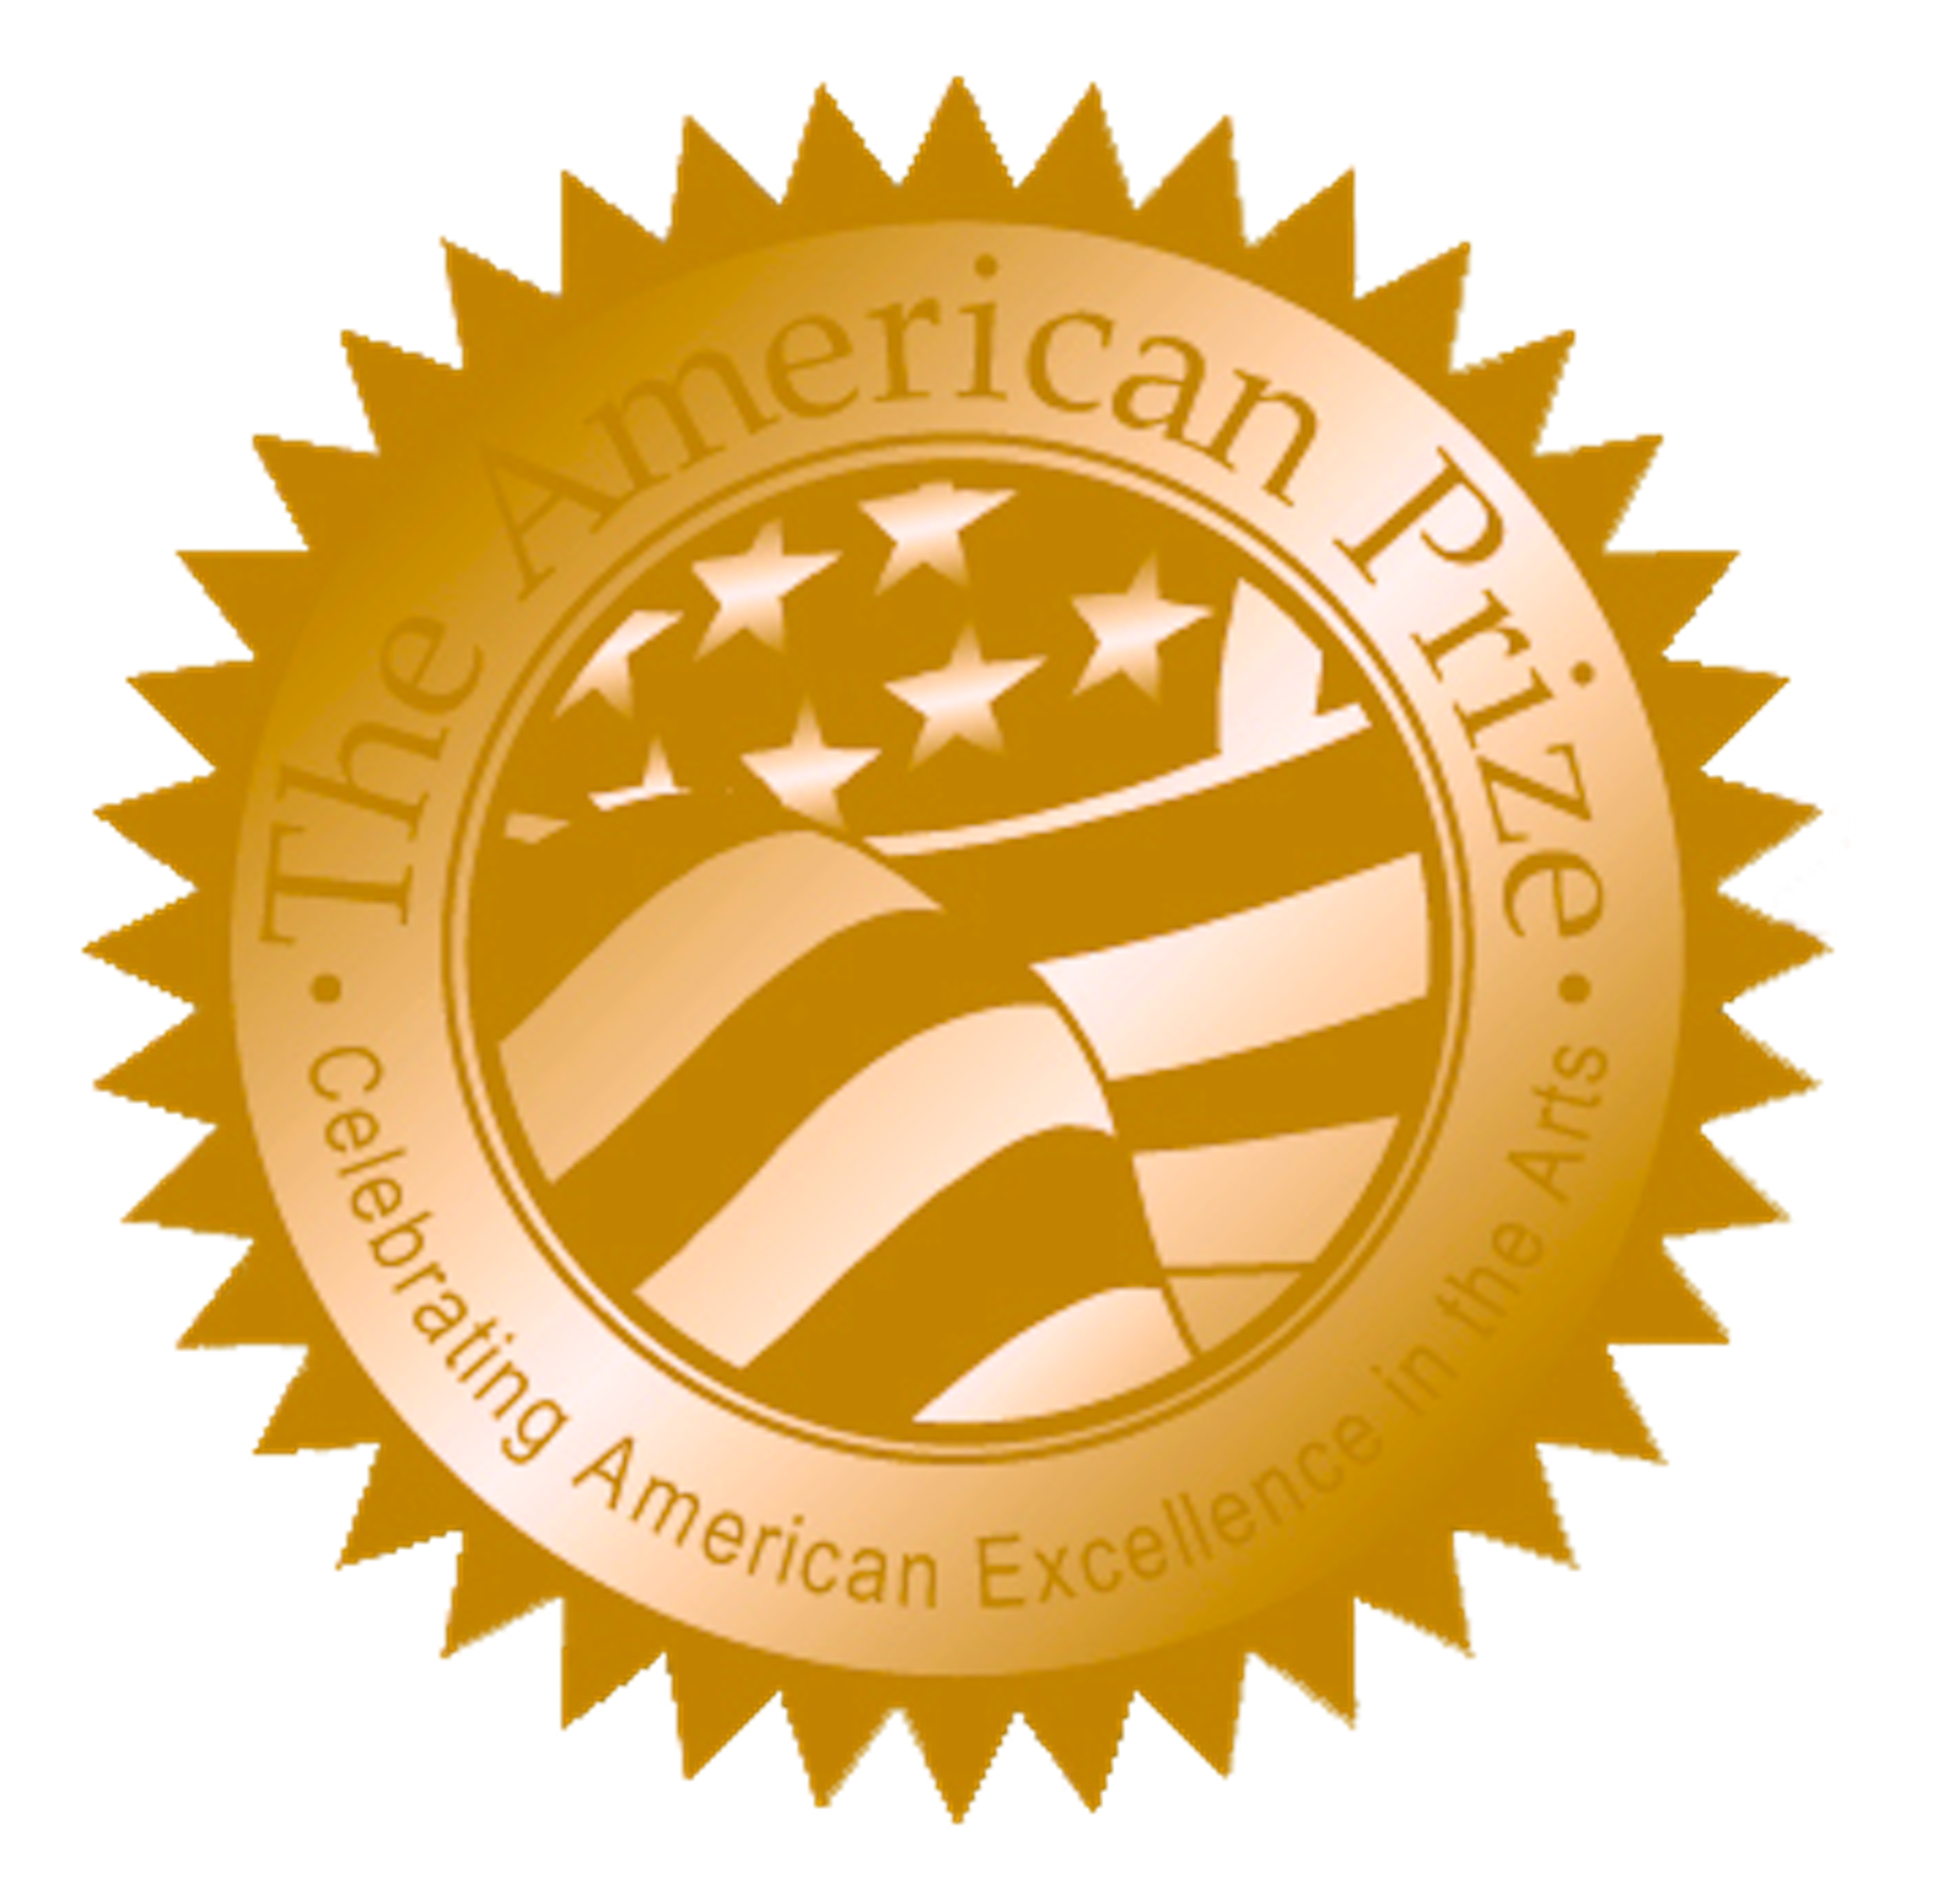 The American Prize gold seal